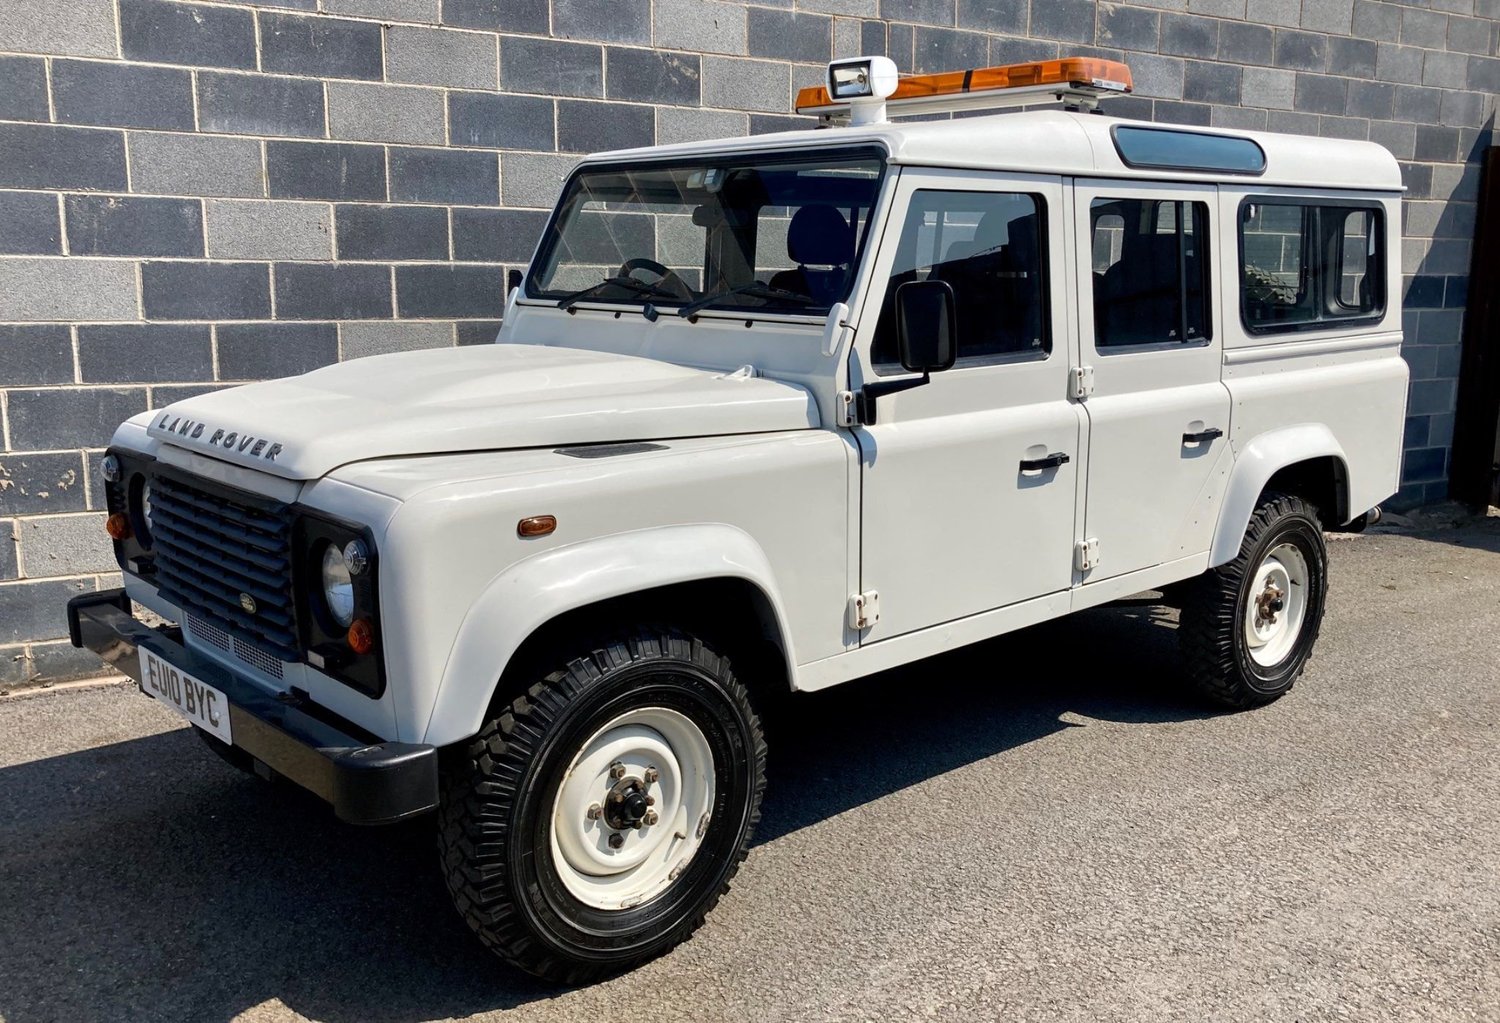 Used LAND ROVER DEFENDER 110 in Pontefract, West Yorkshire